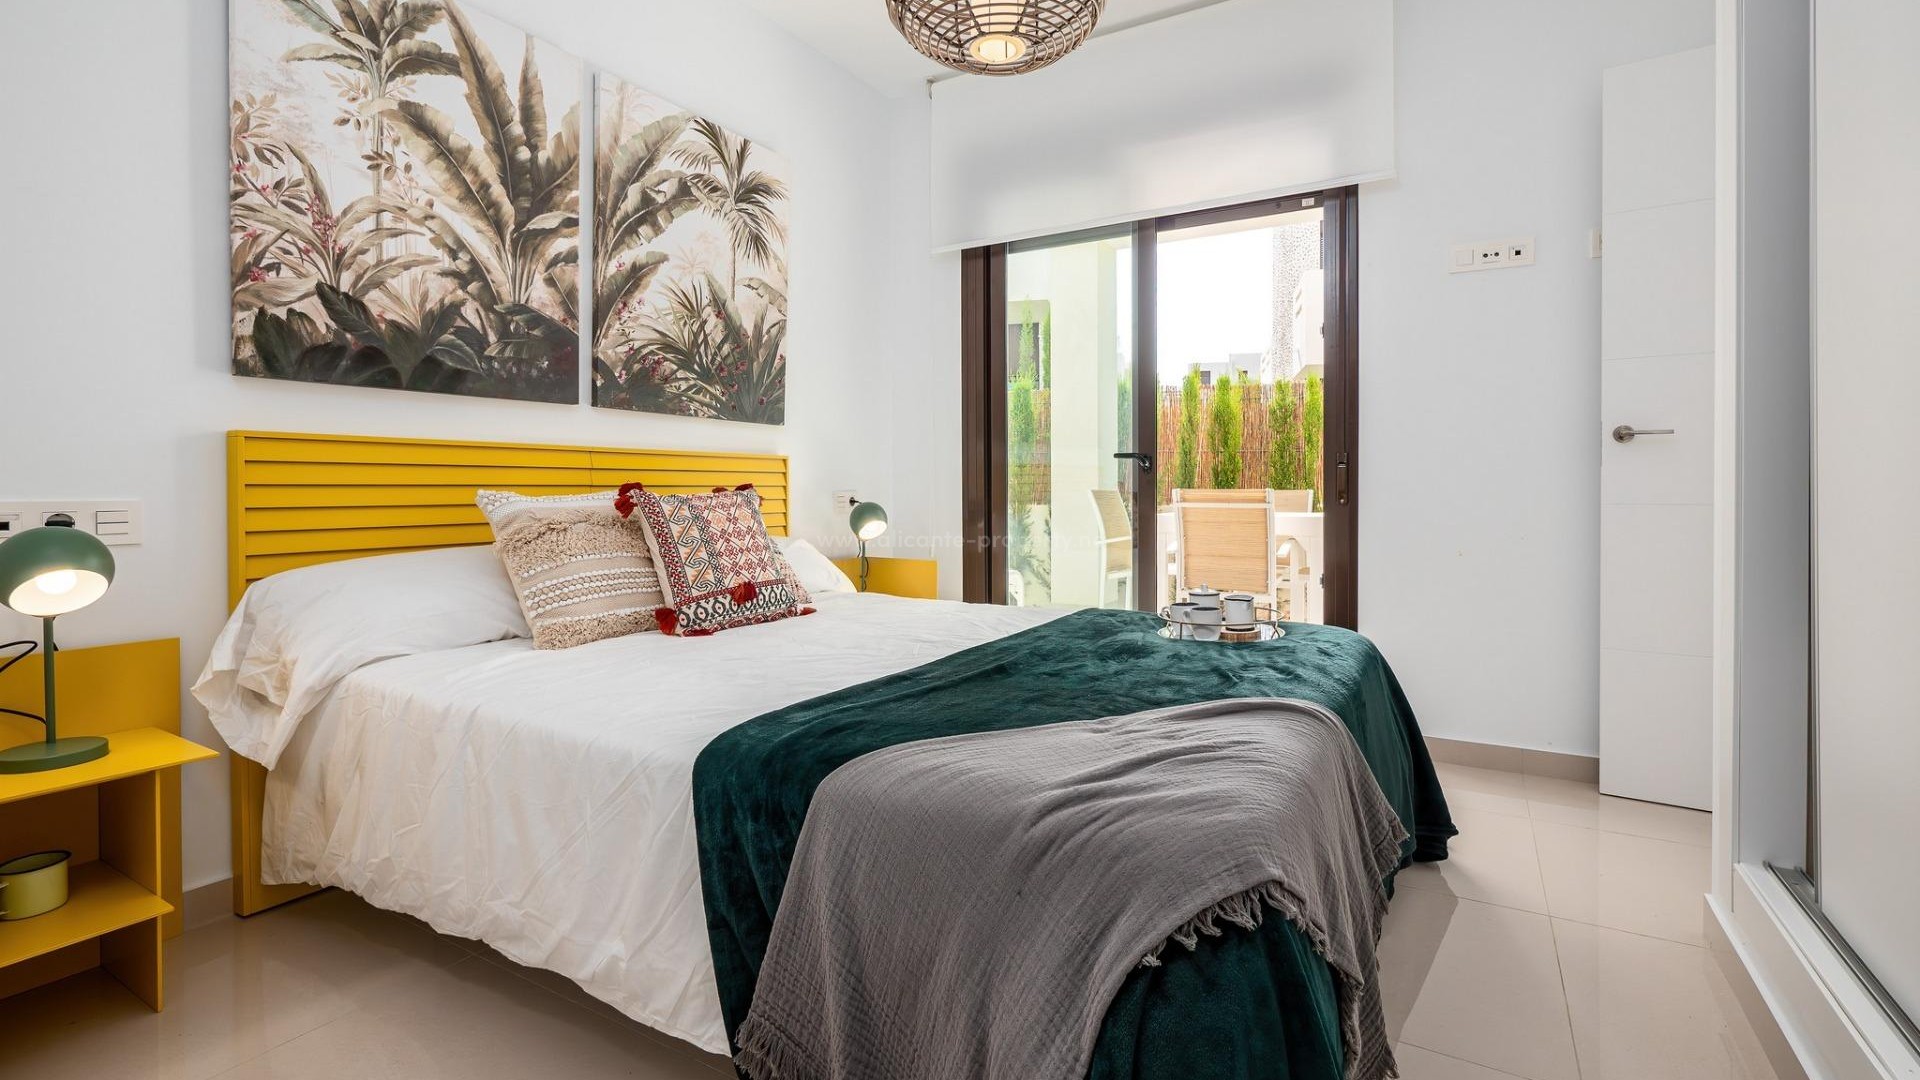 New bungalows/apartments in La Finca Golf, 3 bedrooms (one bedroom with solarium) 2 bathrooms, living/dining room with direct access to spacious terraces. Landscaped garden